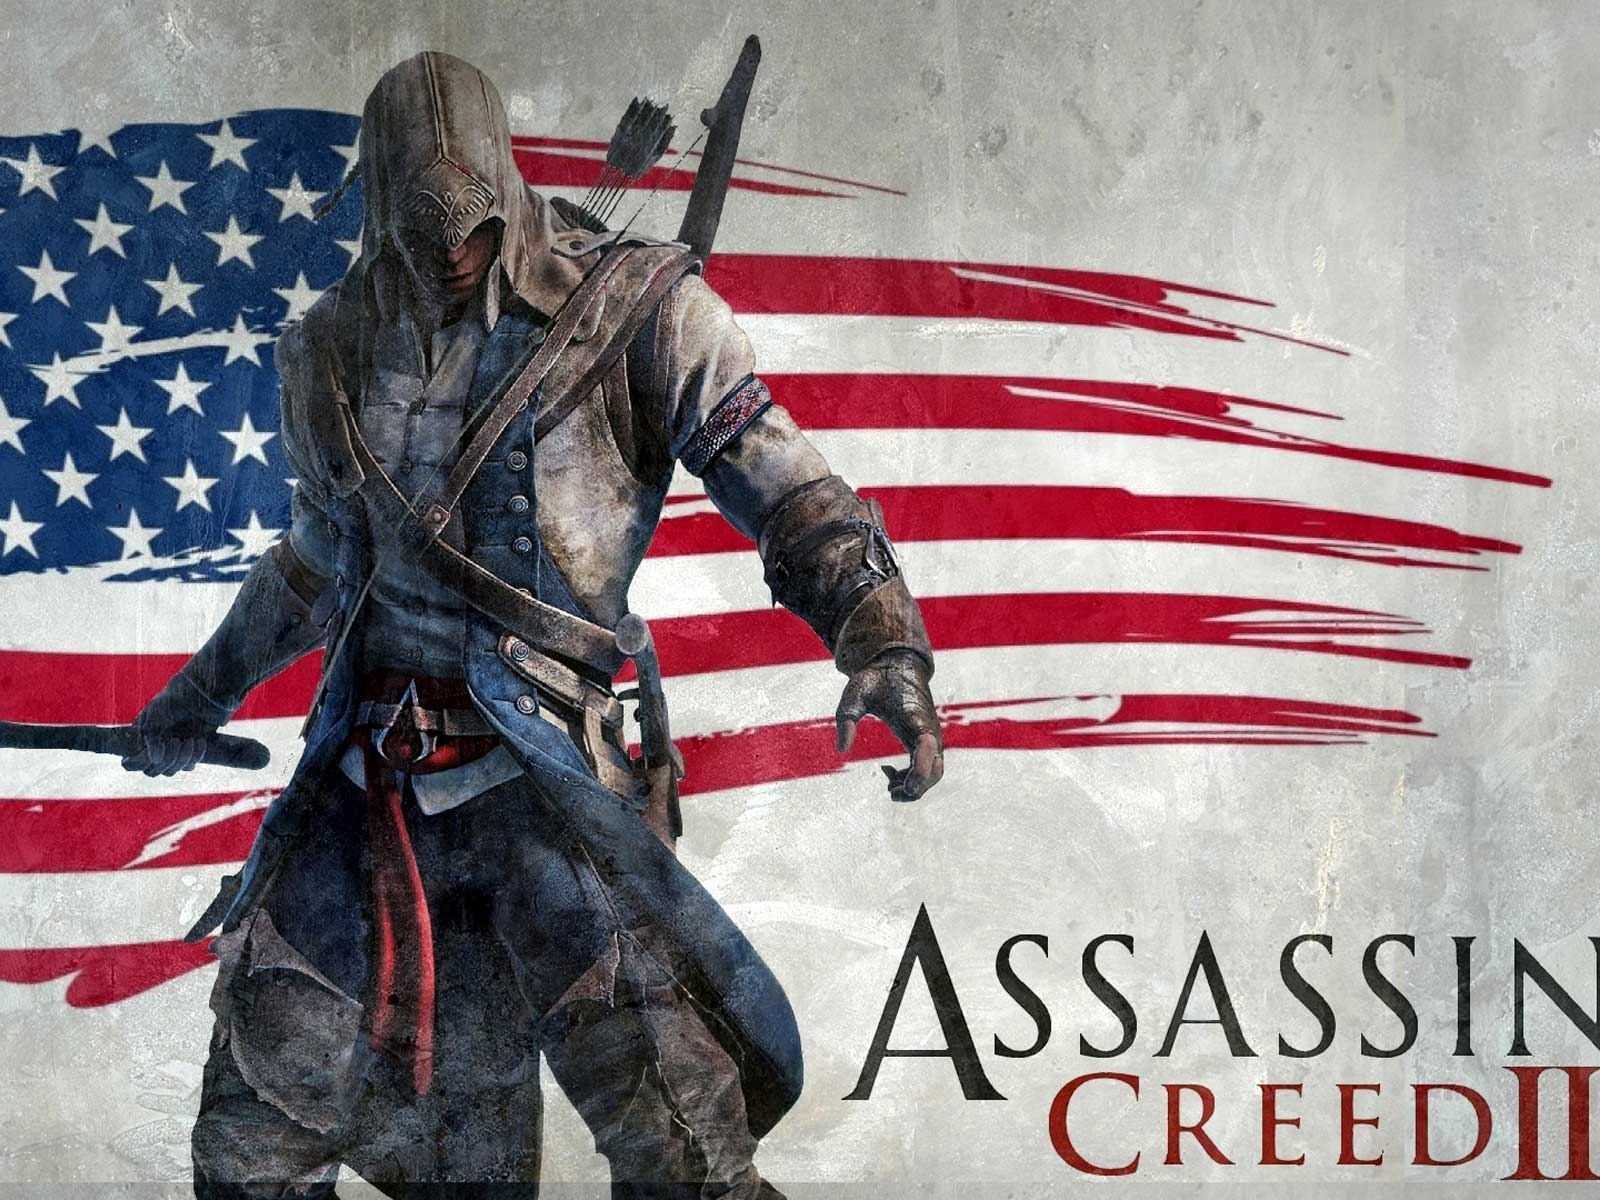 Assassin's Creed 3 HD wallpapers #12 - 1600x1200